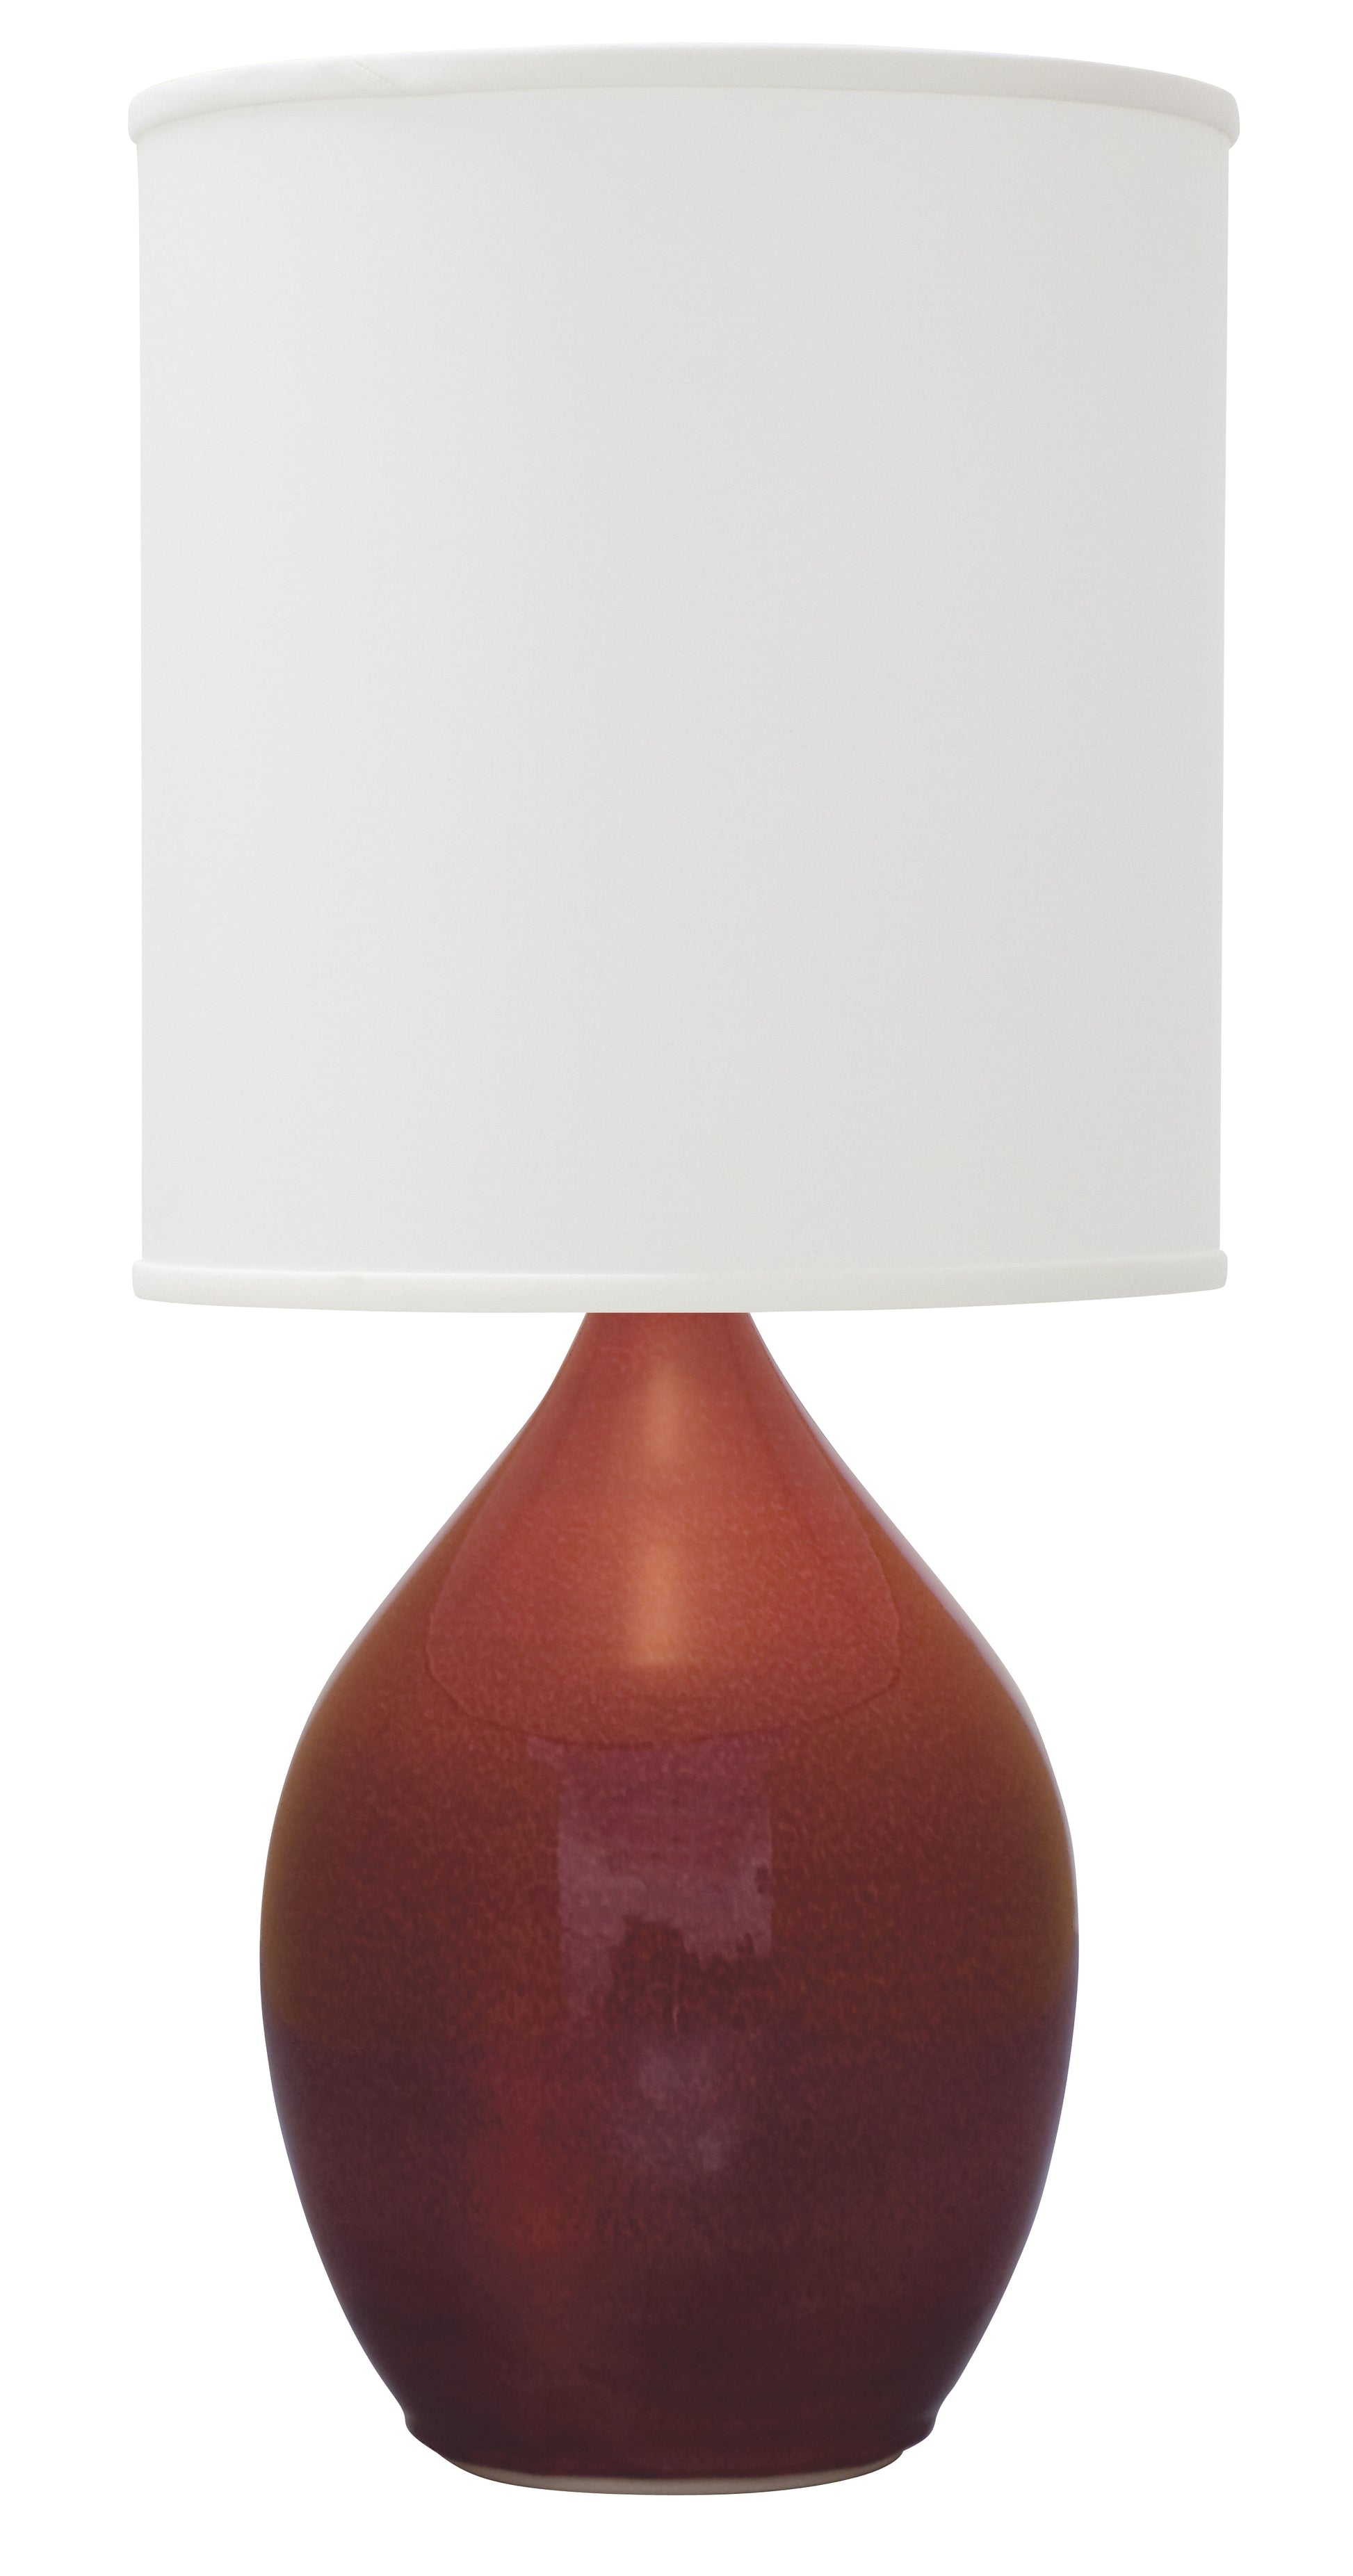 House of Troy Scatchard 20.5" Stoneware Table Lamp in Copper Red GS201-CR